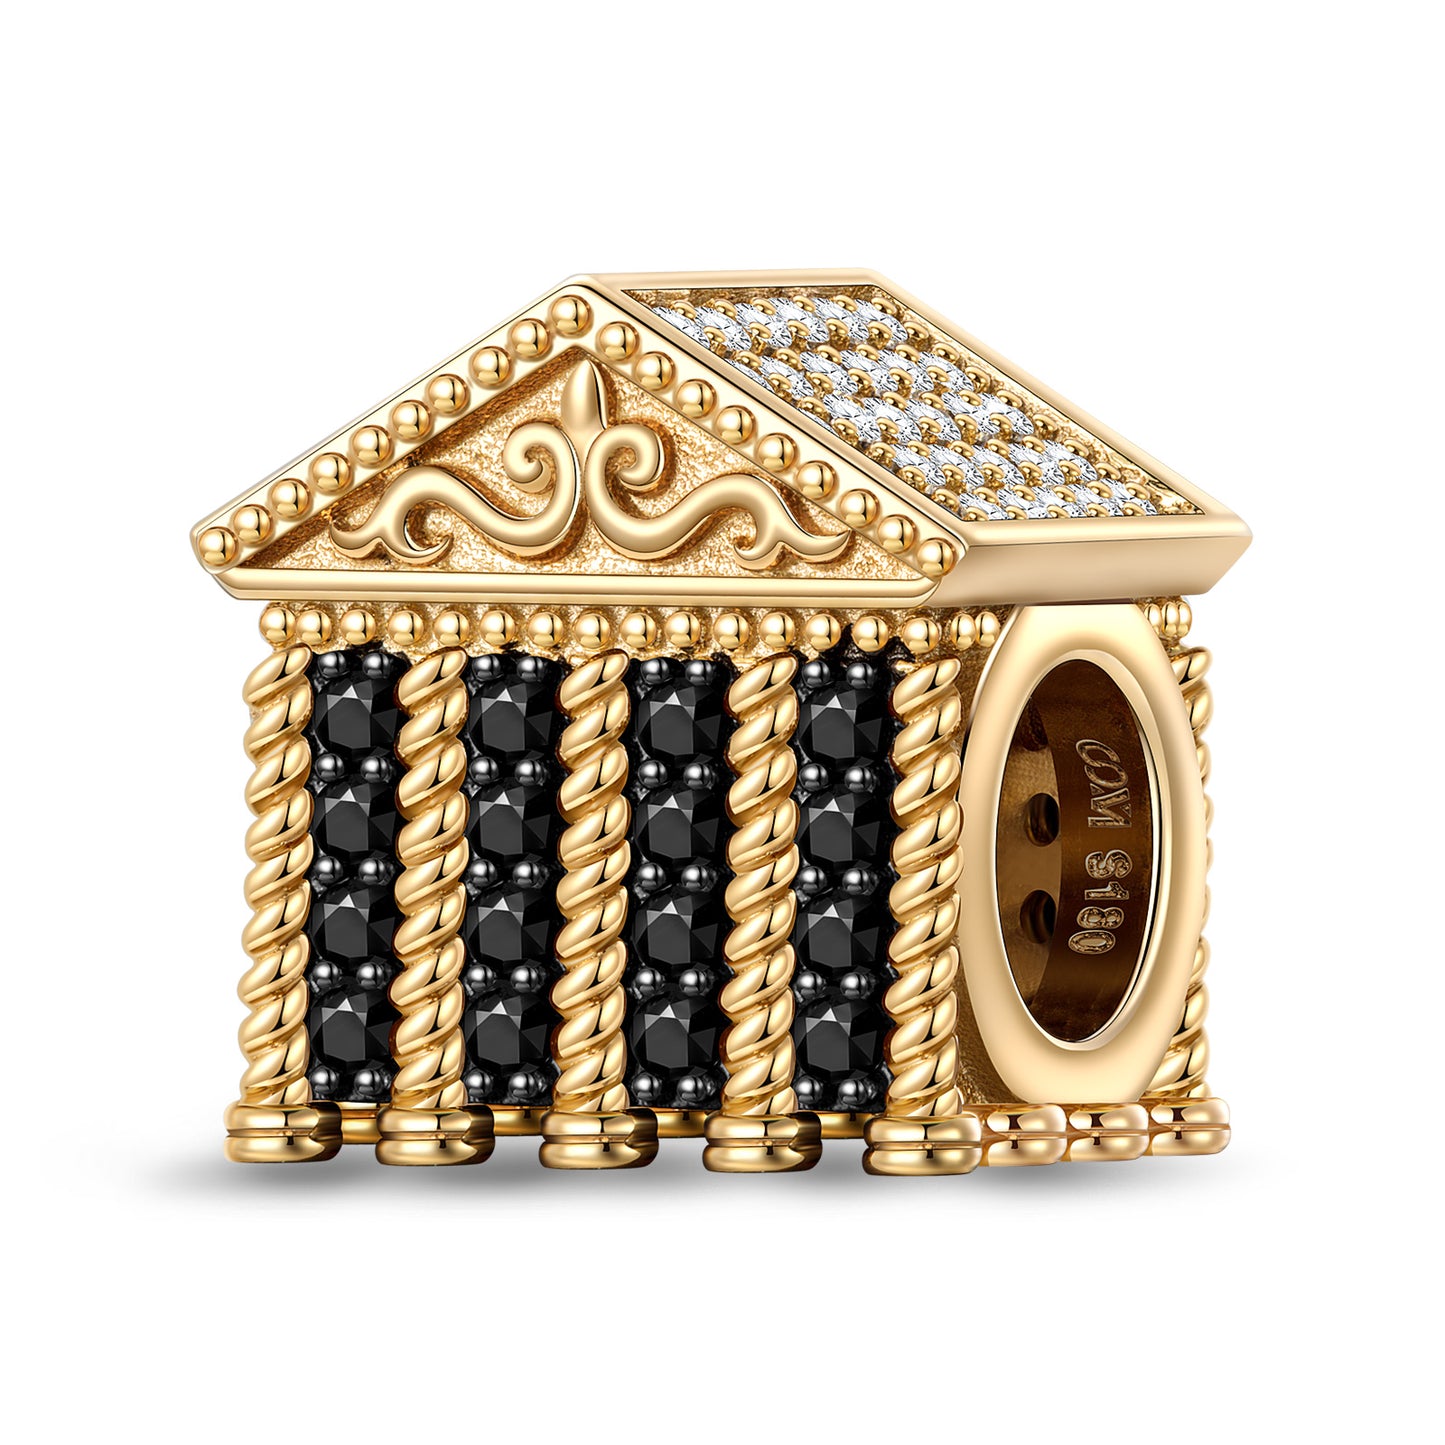 The Madeleine Church Tarnish-resistant Silver Charms In 14K Gold Plated